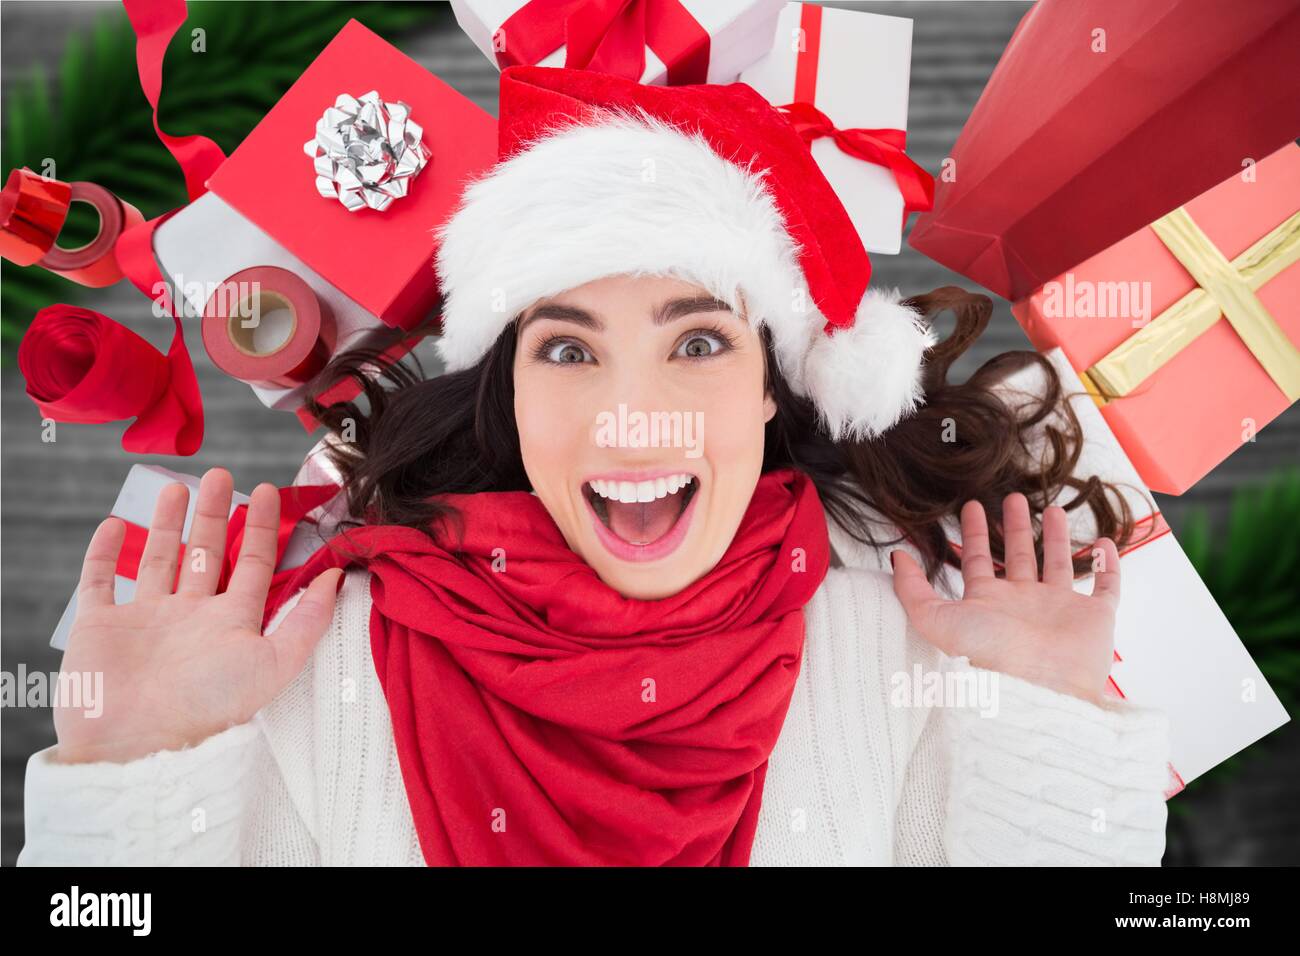 Excited woman in santa hat against digitally generated background Stock Photo